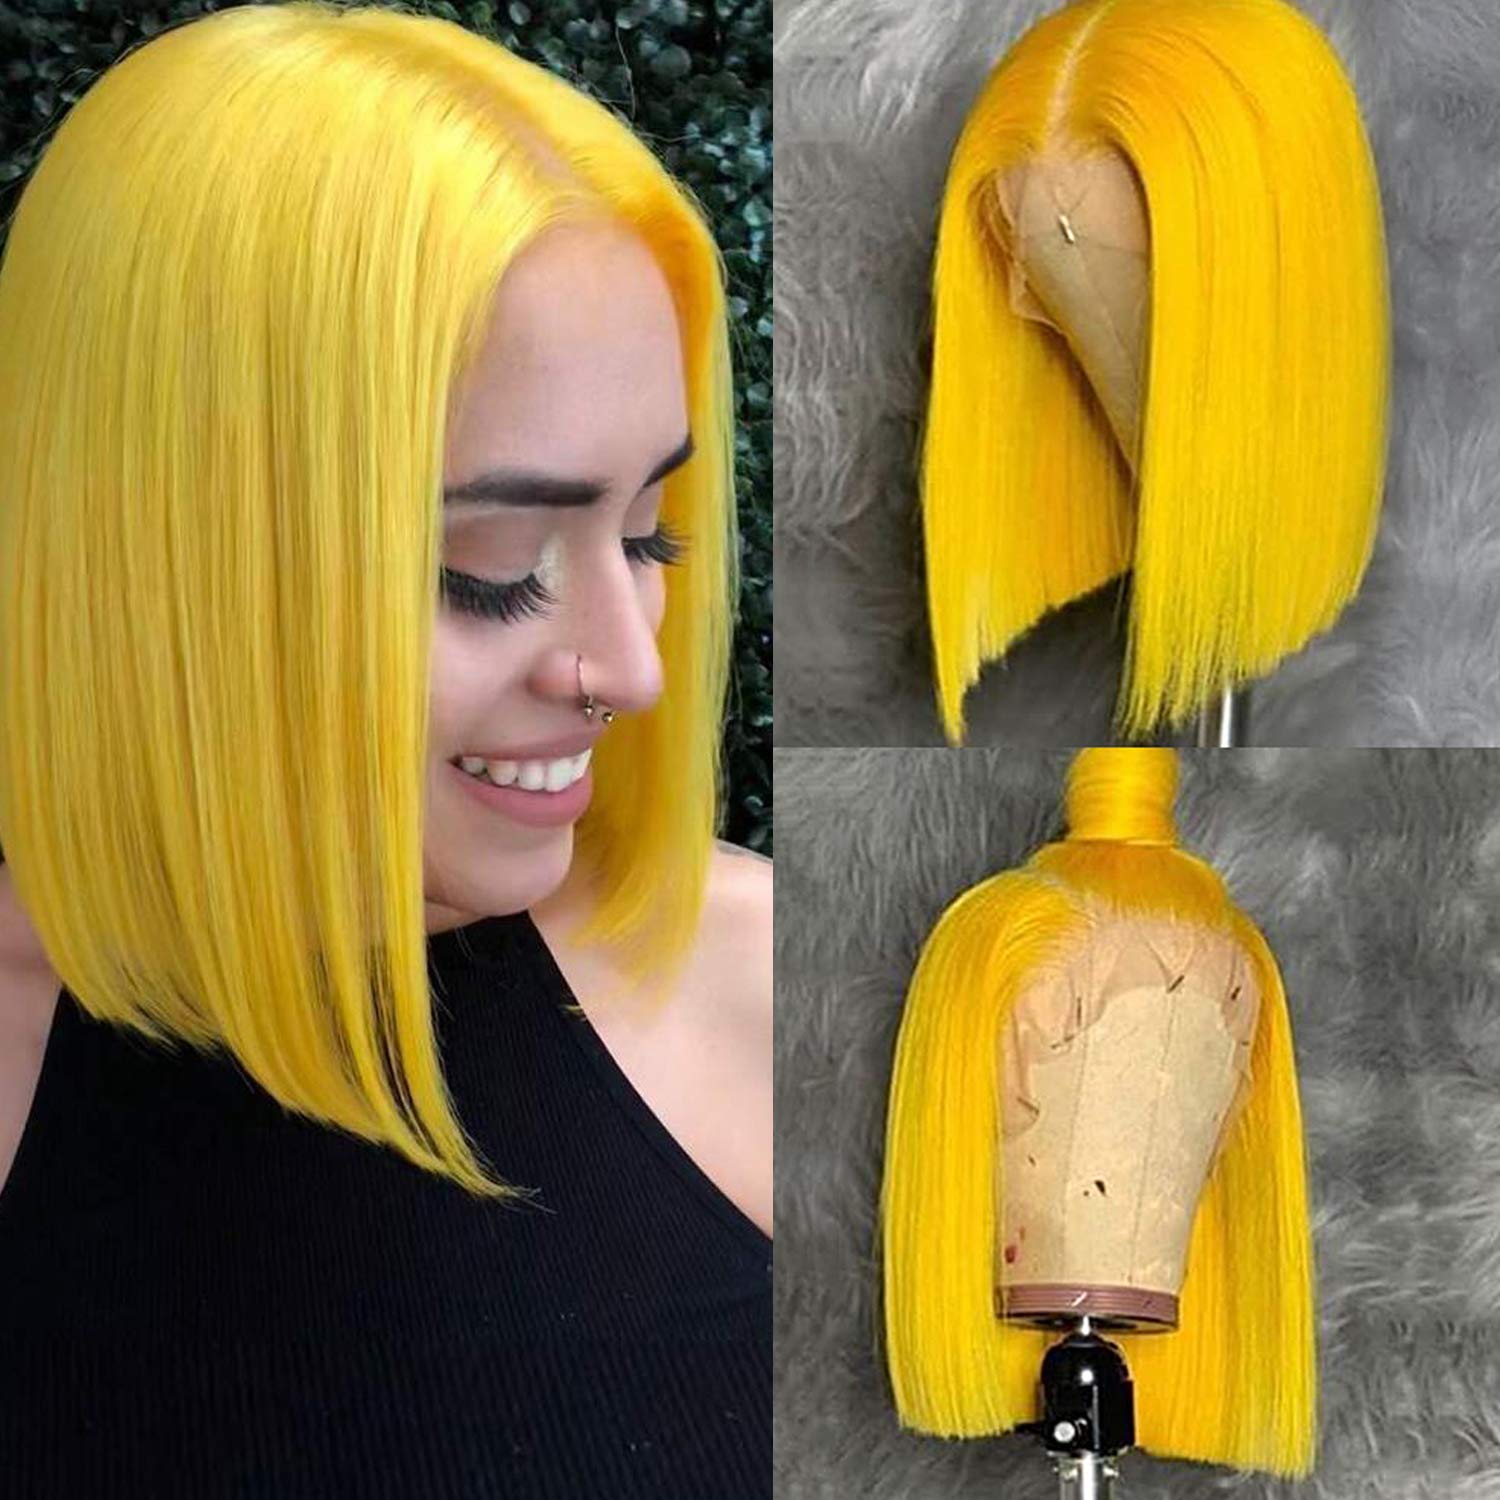 Price:$63.99     Yellow Bob Wig for Black Women 10”Pre Plucked 150% Density Straight Side Part Lace Front Wigs Brazilian Remy Human Hair Lace Wigs with Adjustable Straps Colored Hair   Beauty